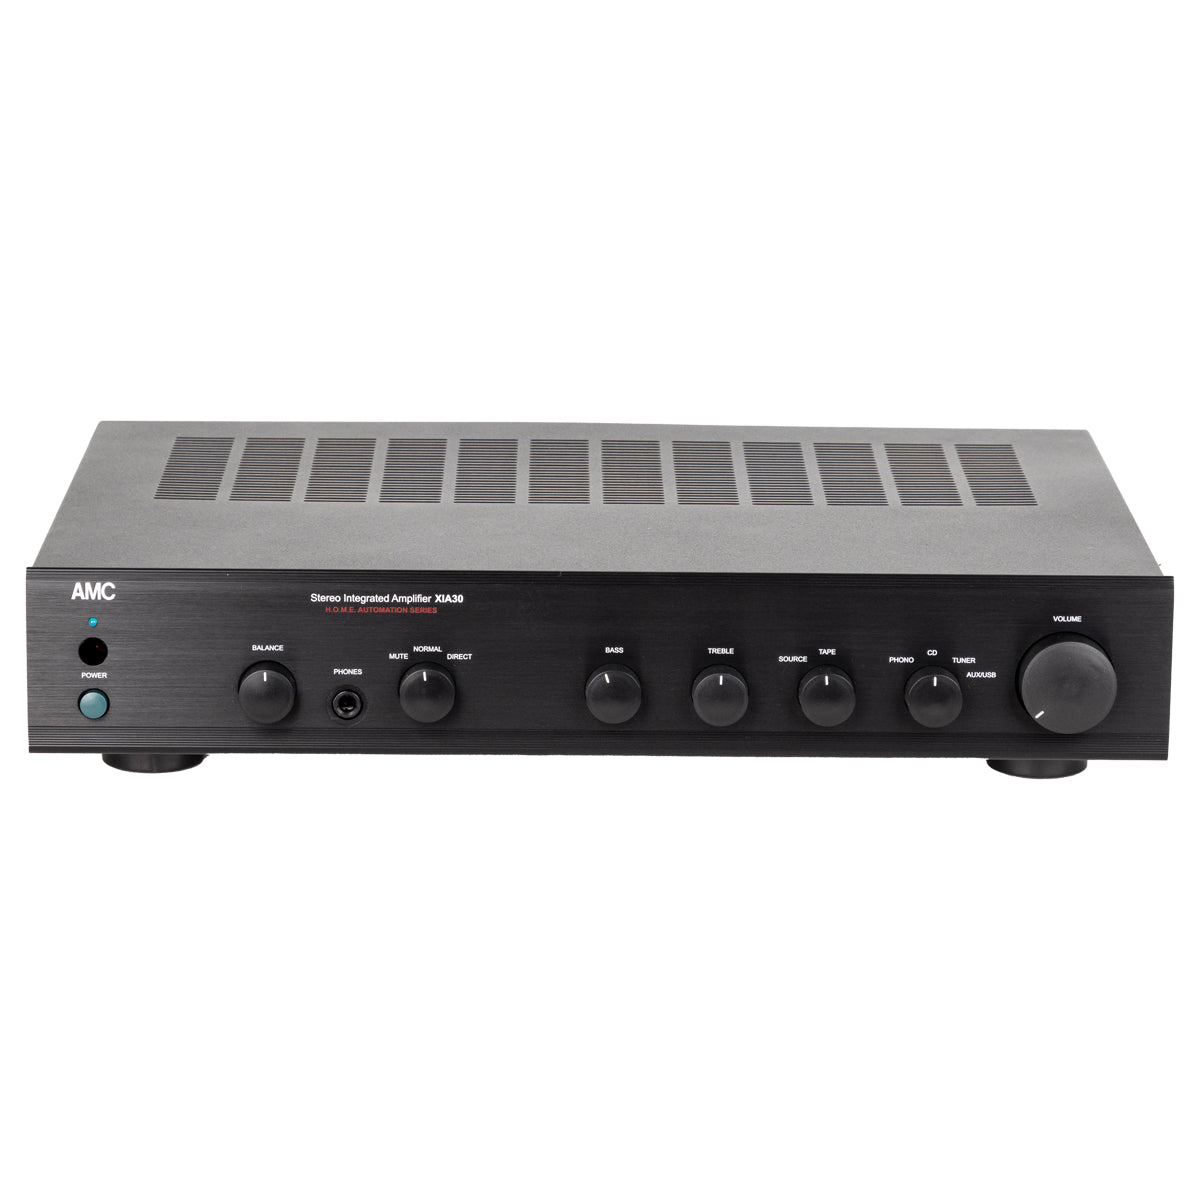 AMC XIA 30 Stereo Amplifier - Black - The Audio Experts